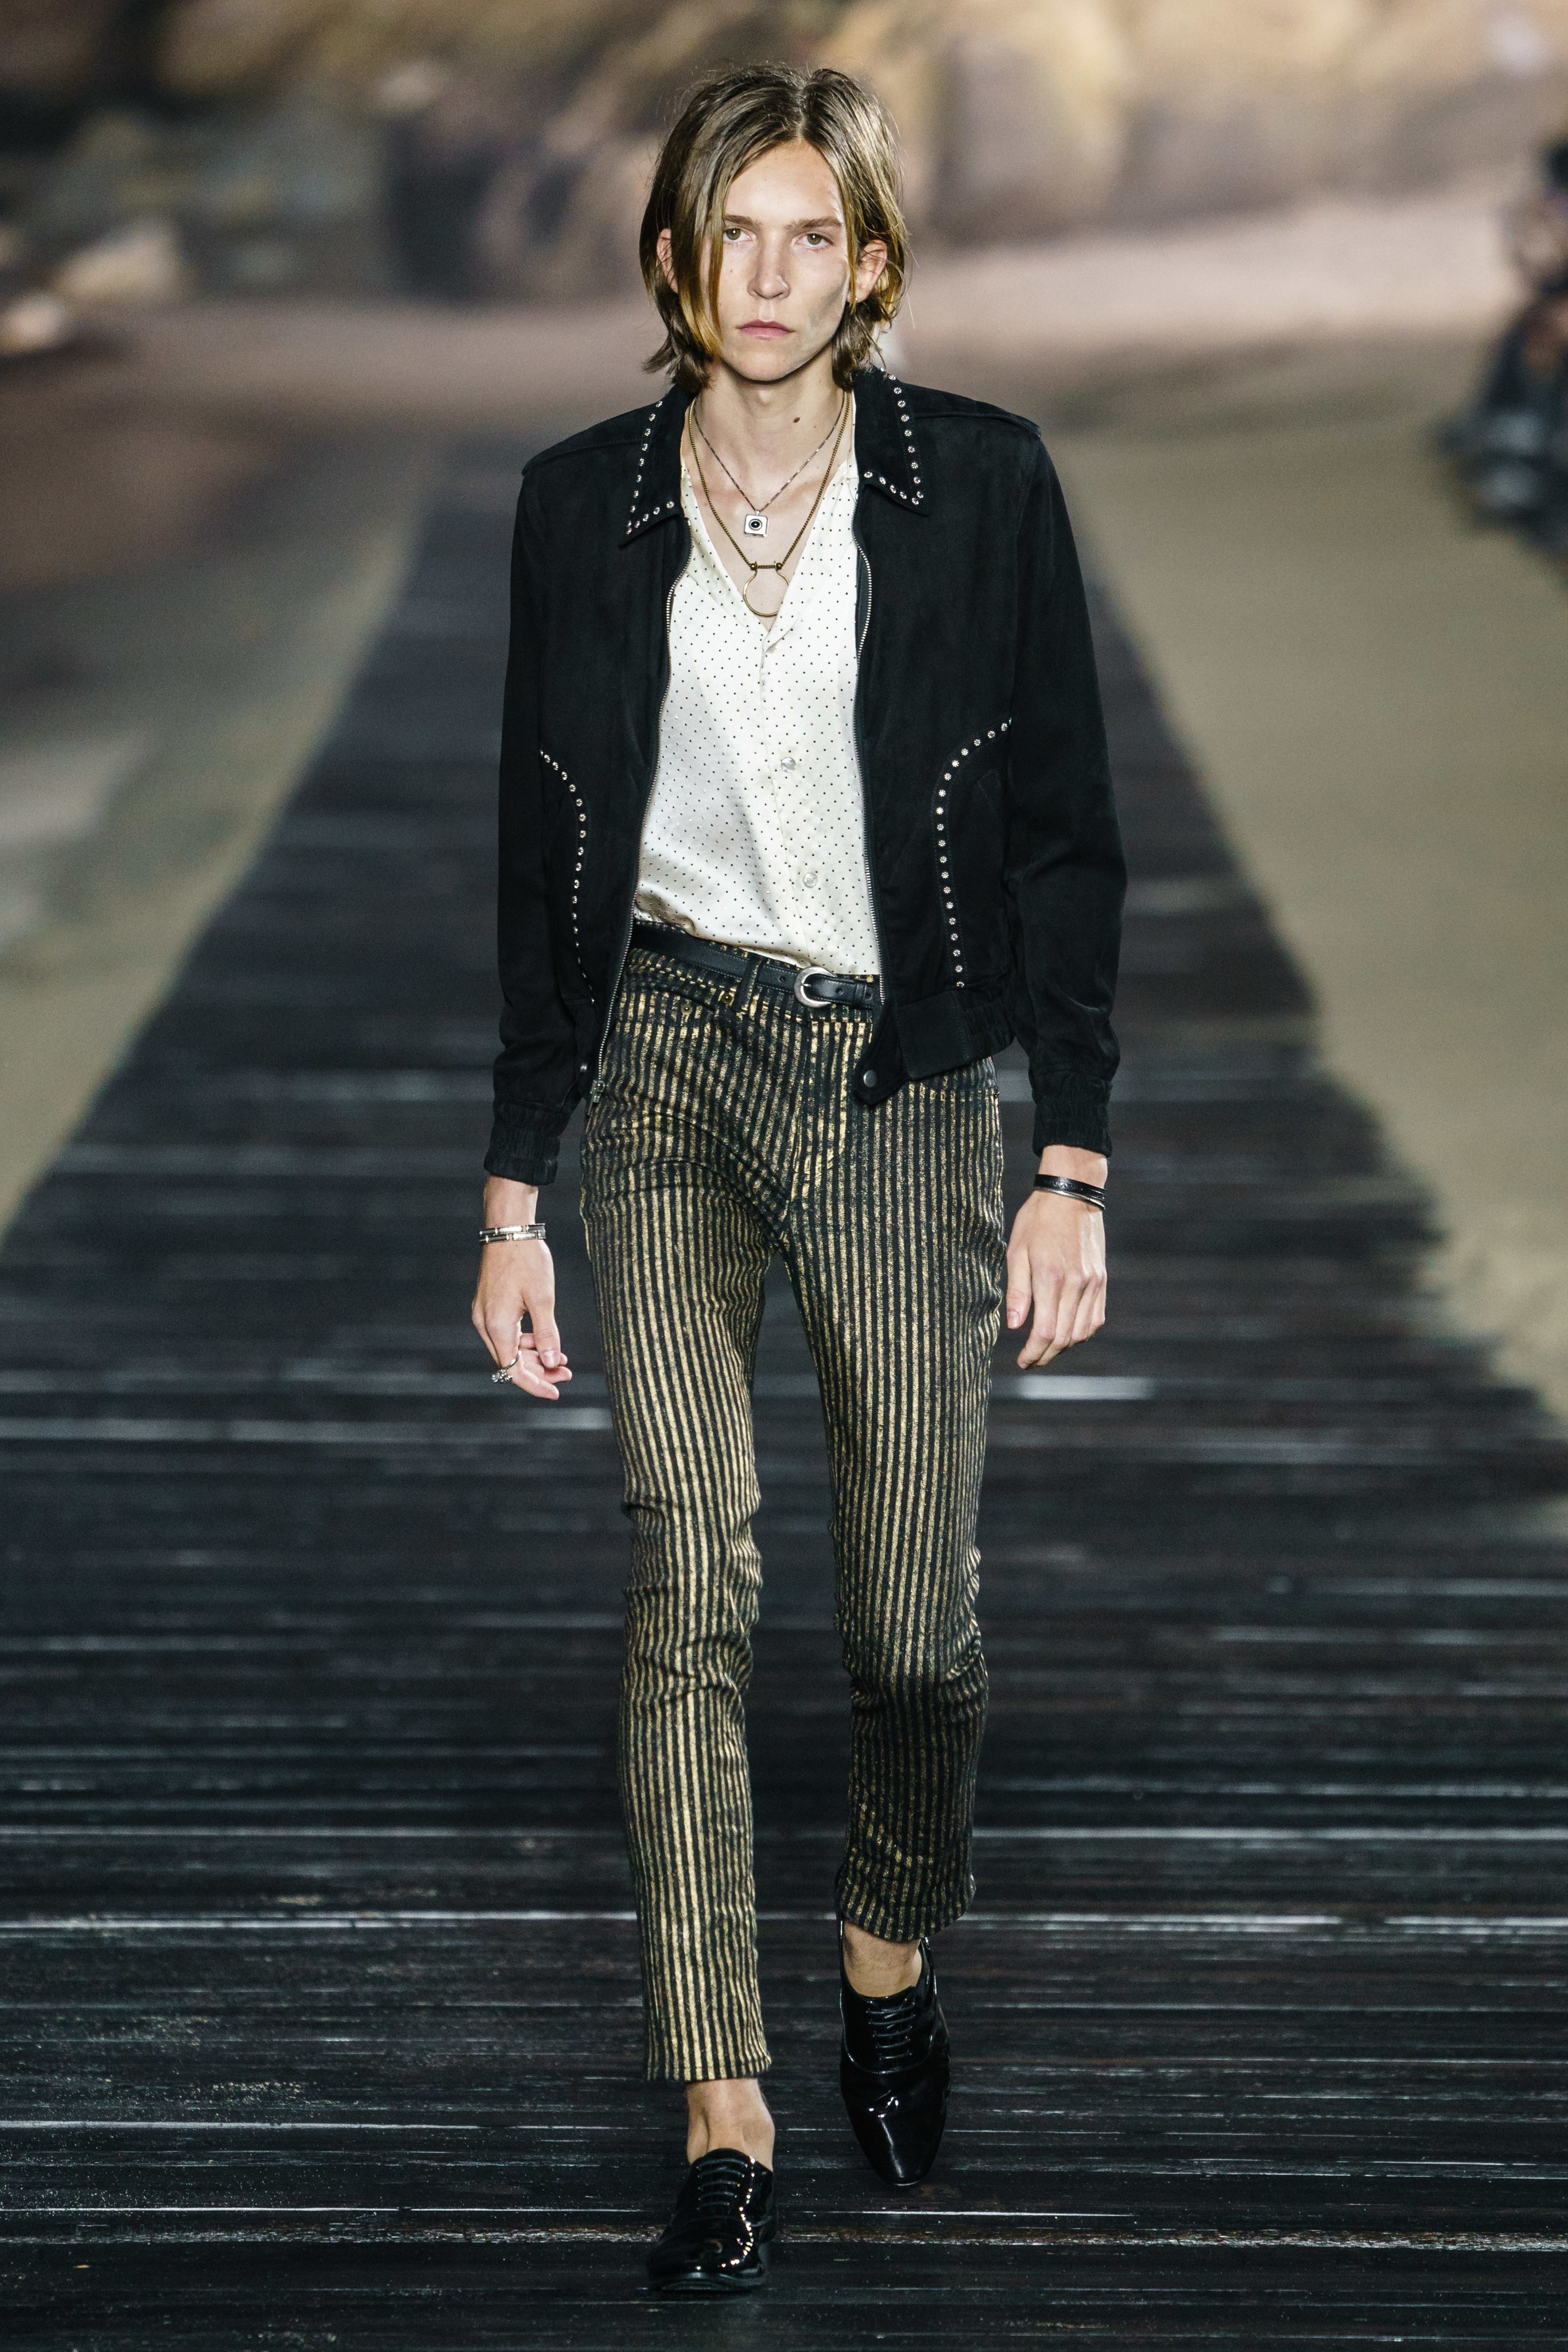 Saint Laurent Spring/Summer 2020 Collection from Los Angeles